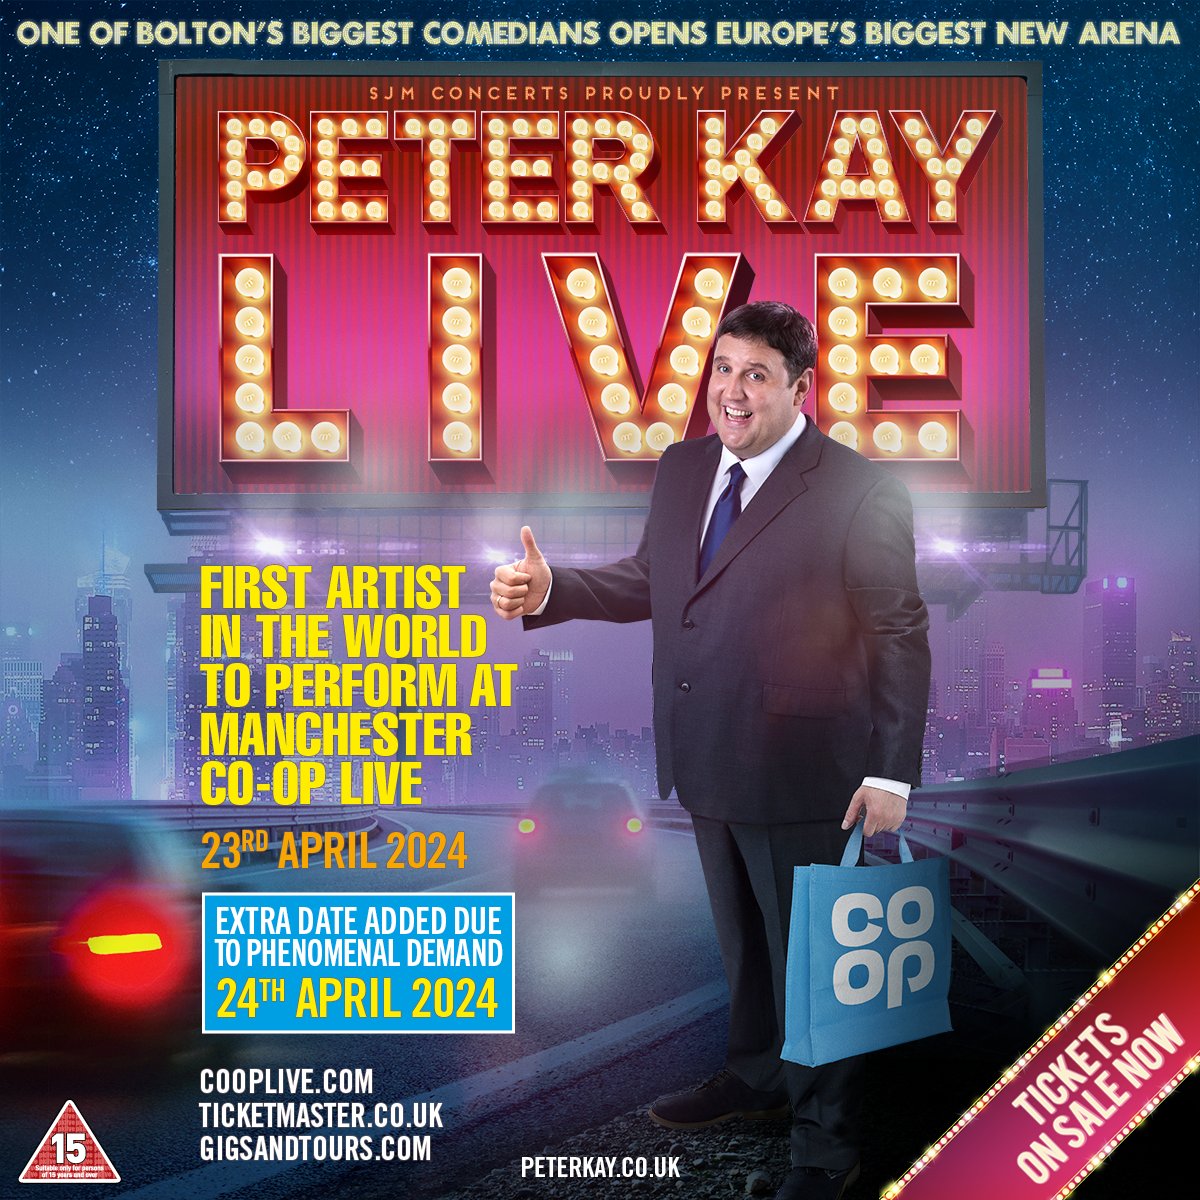 Peter Kay has announced an extra date at Co-op Live on 24 April 2024! Tickets on sale now at tix.to/PeterKay